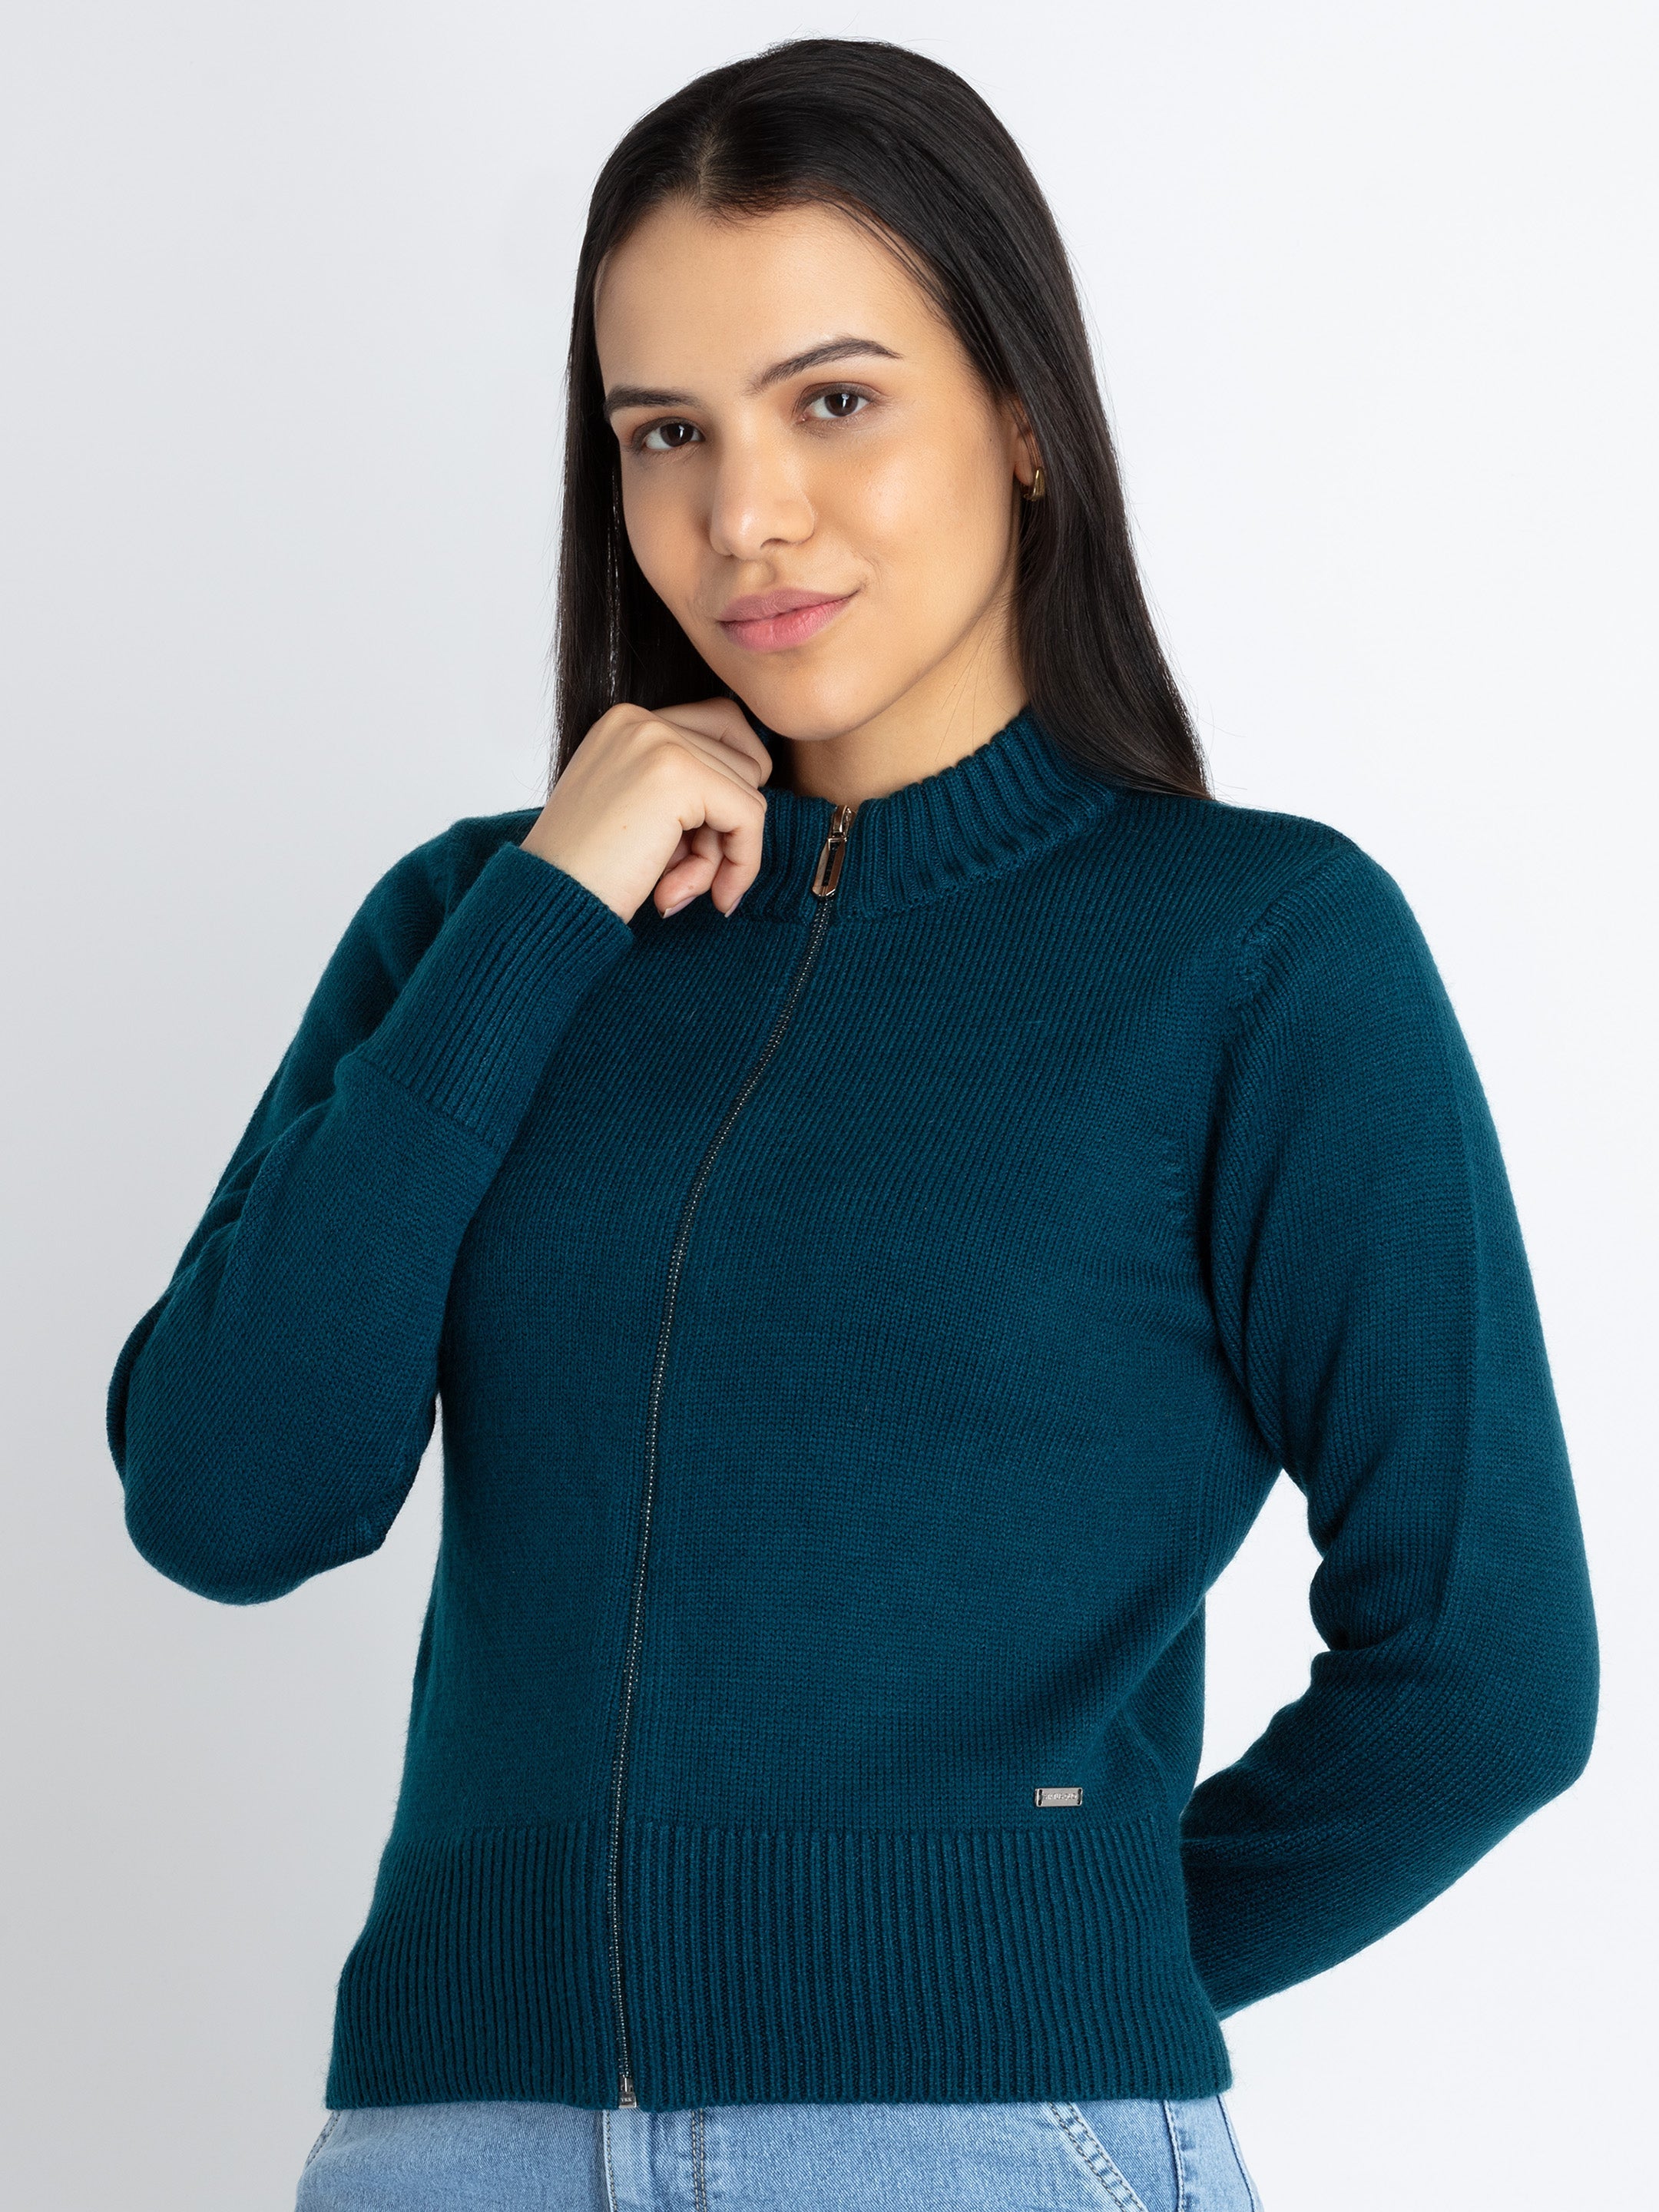 Teal Sweaters For Women